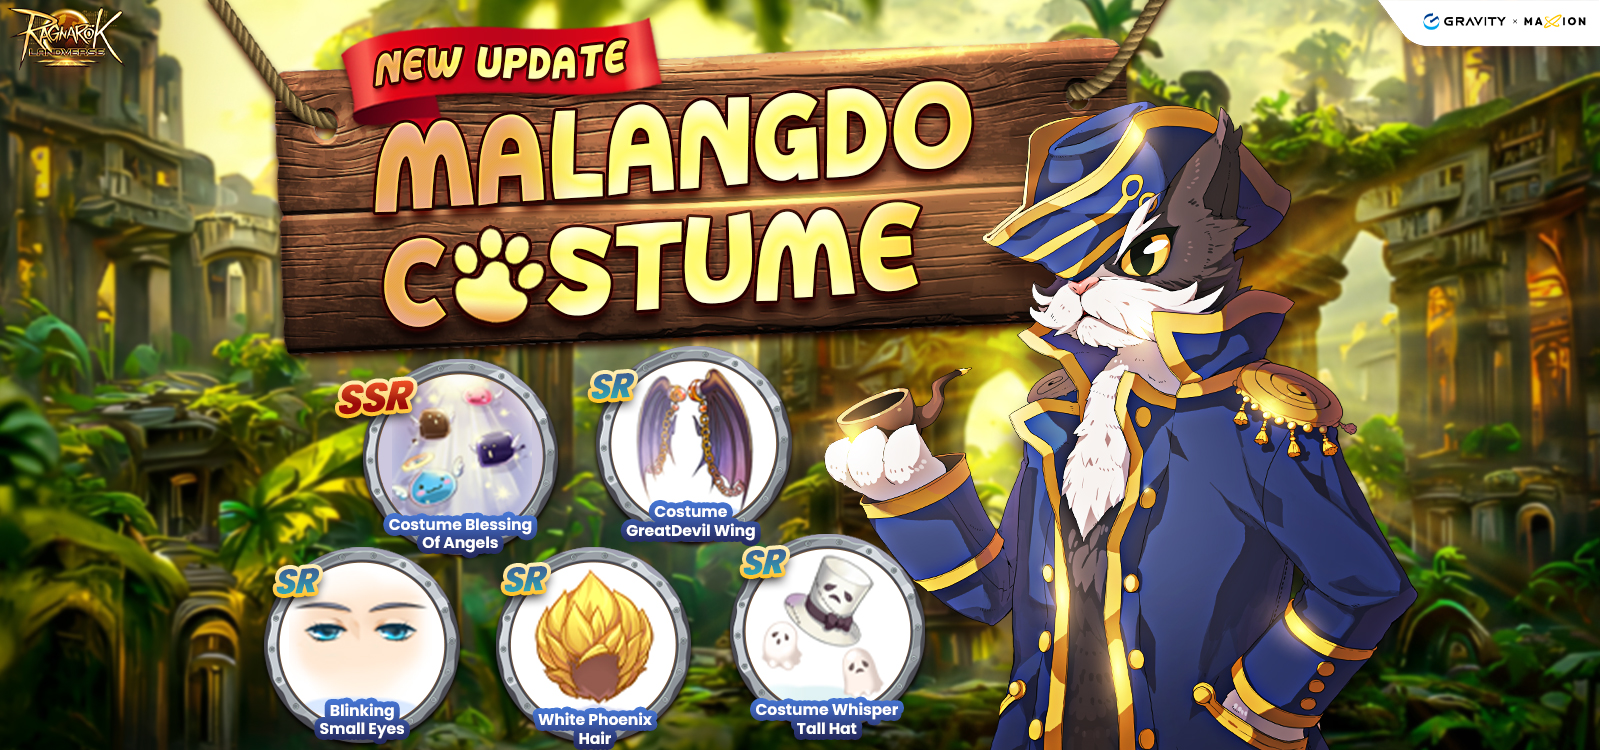 Turn your Silvervine into a costume with the Malangdo Costume